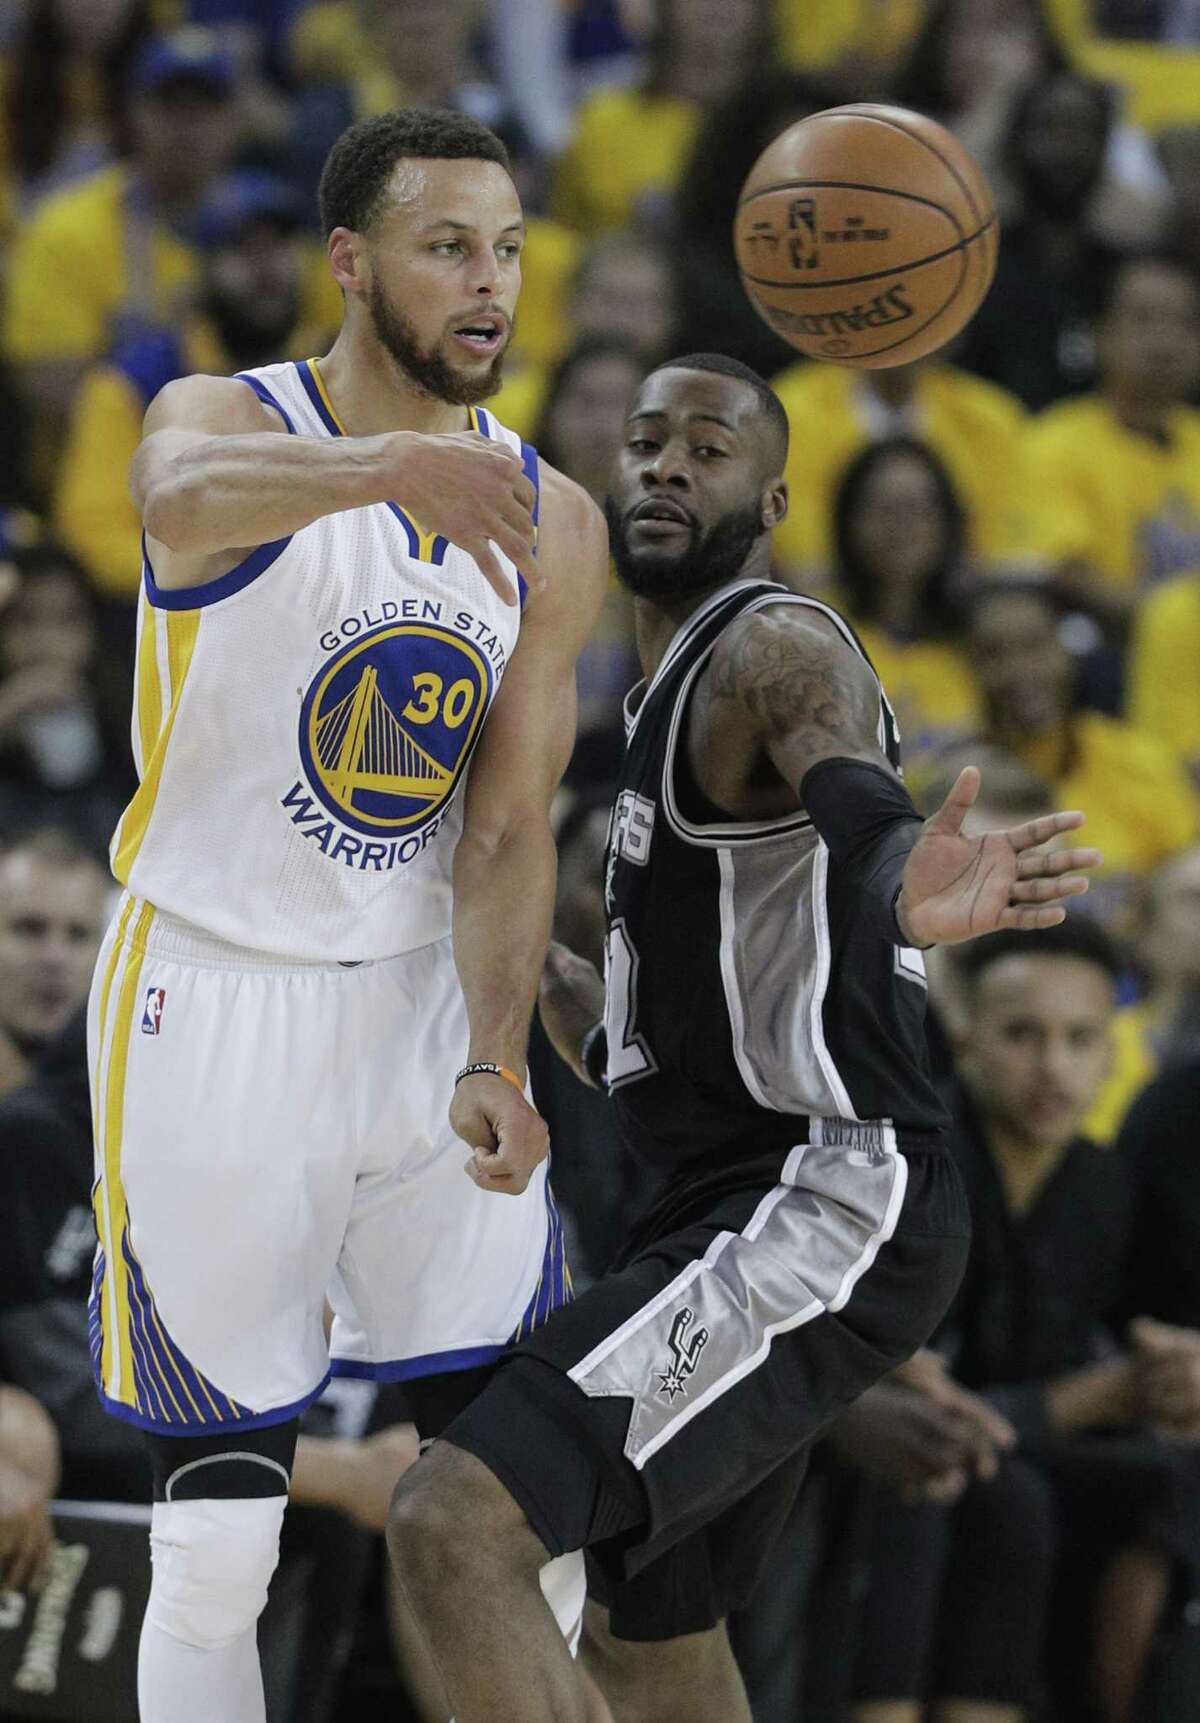 Golden State Warriors’ Stephen Curry passes around the Spurs’ Jonathon Simmons in the first quarter during Game 1 of the Western Conference finals at Oracle Arena on May 14, 2017 in Oakland, Calif.